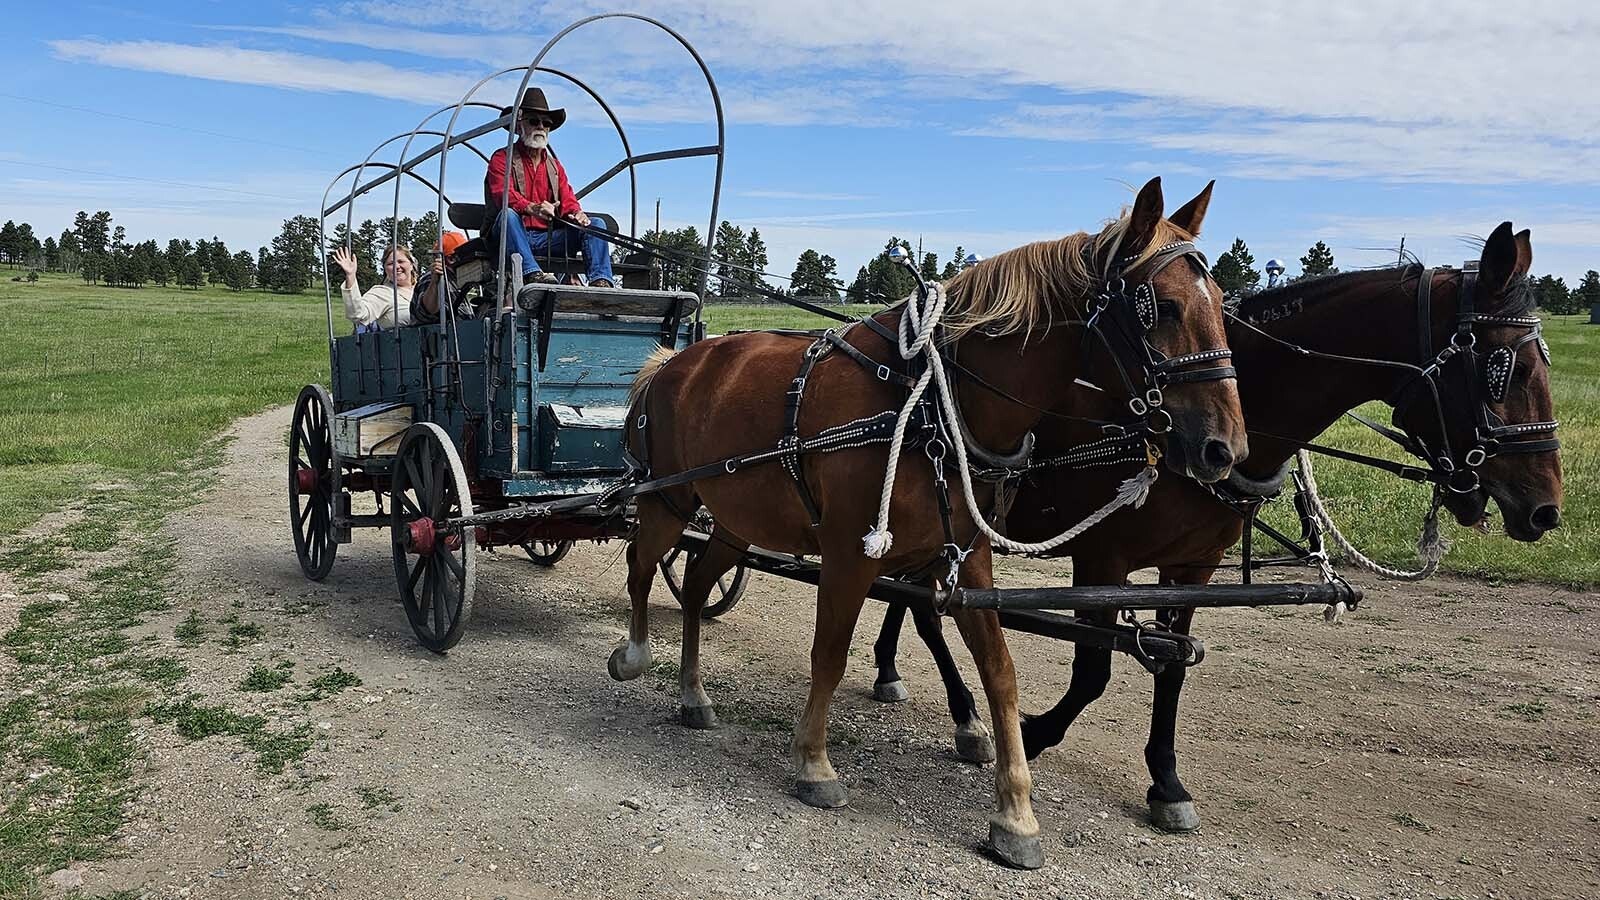 A horse and buggy brings guests in to the Esterbrook Church. Cars are parked a distance away, to leave room for those arriving the old fashioned way.